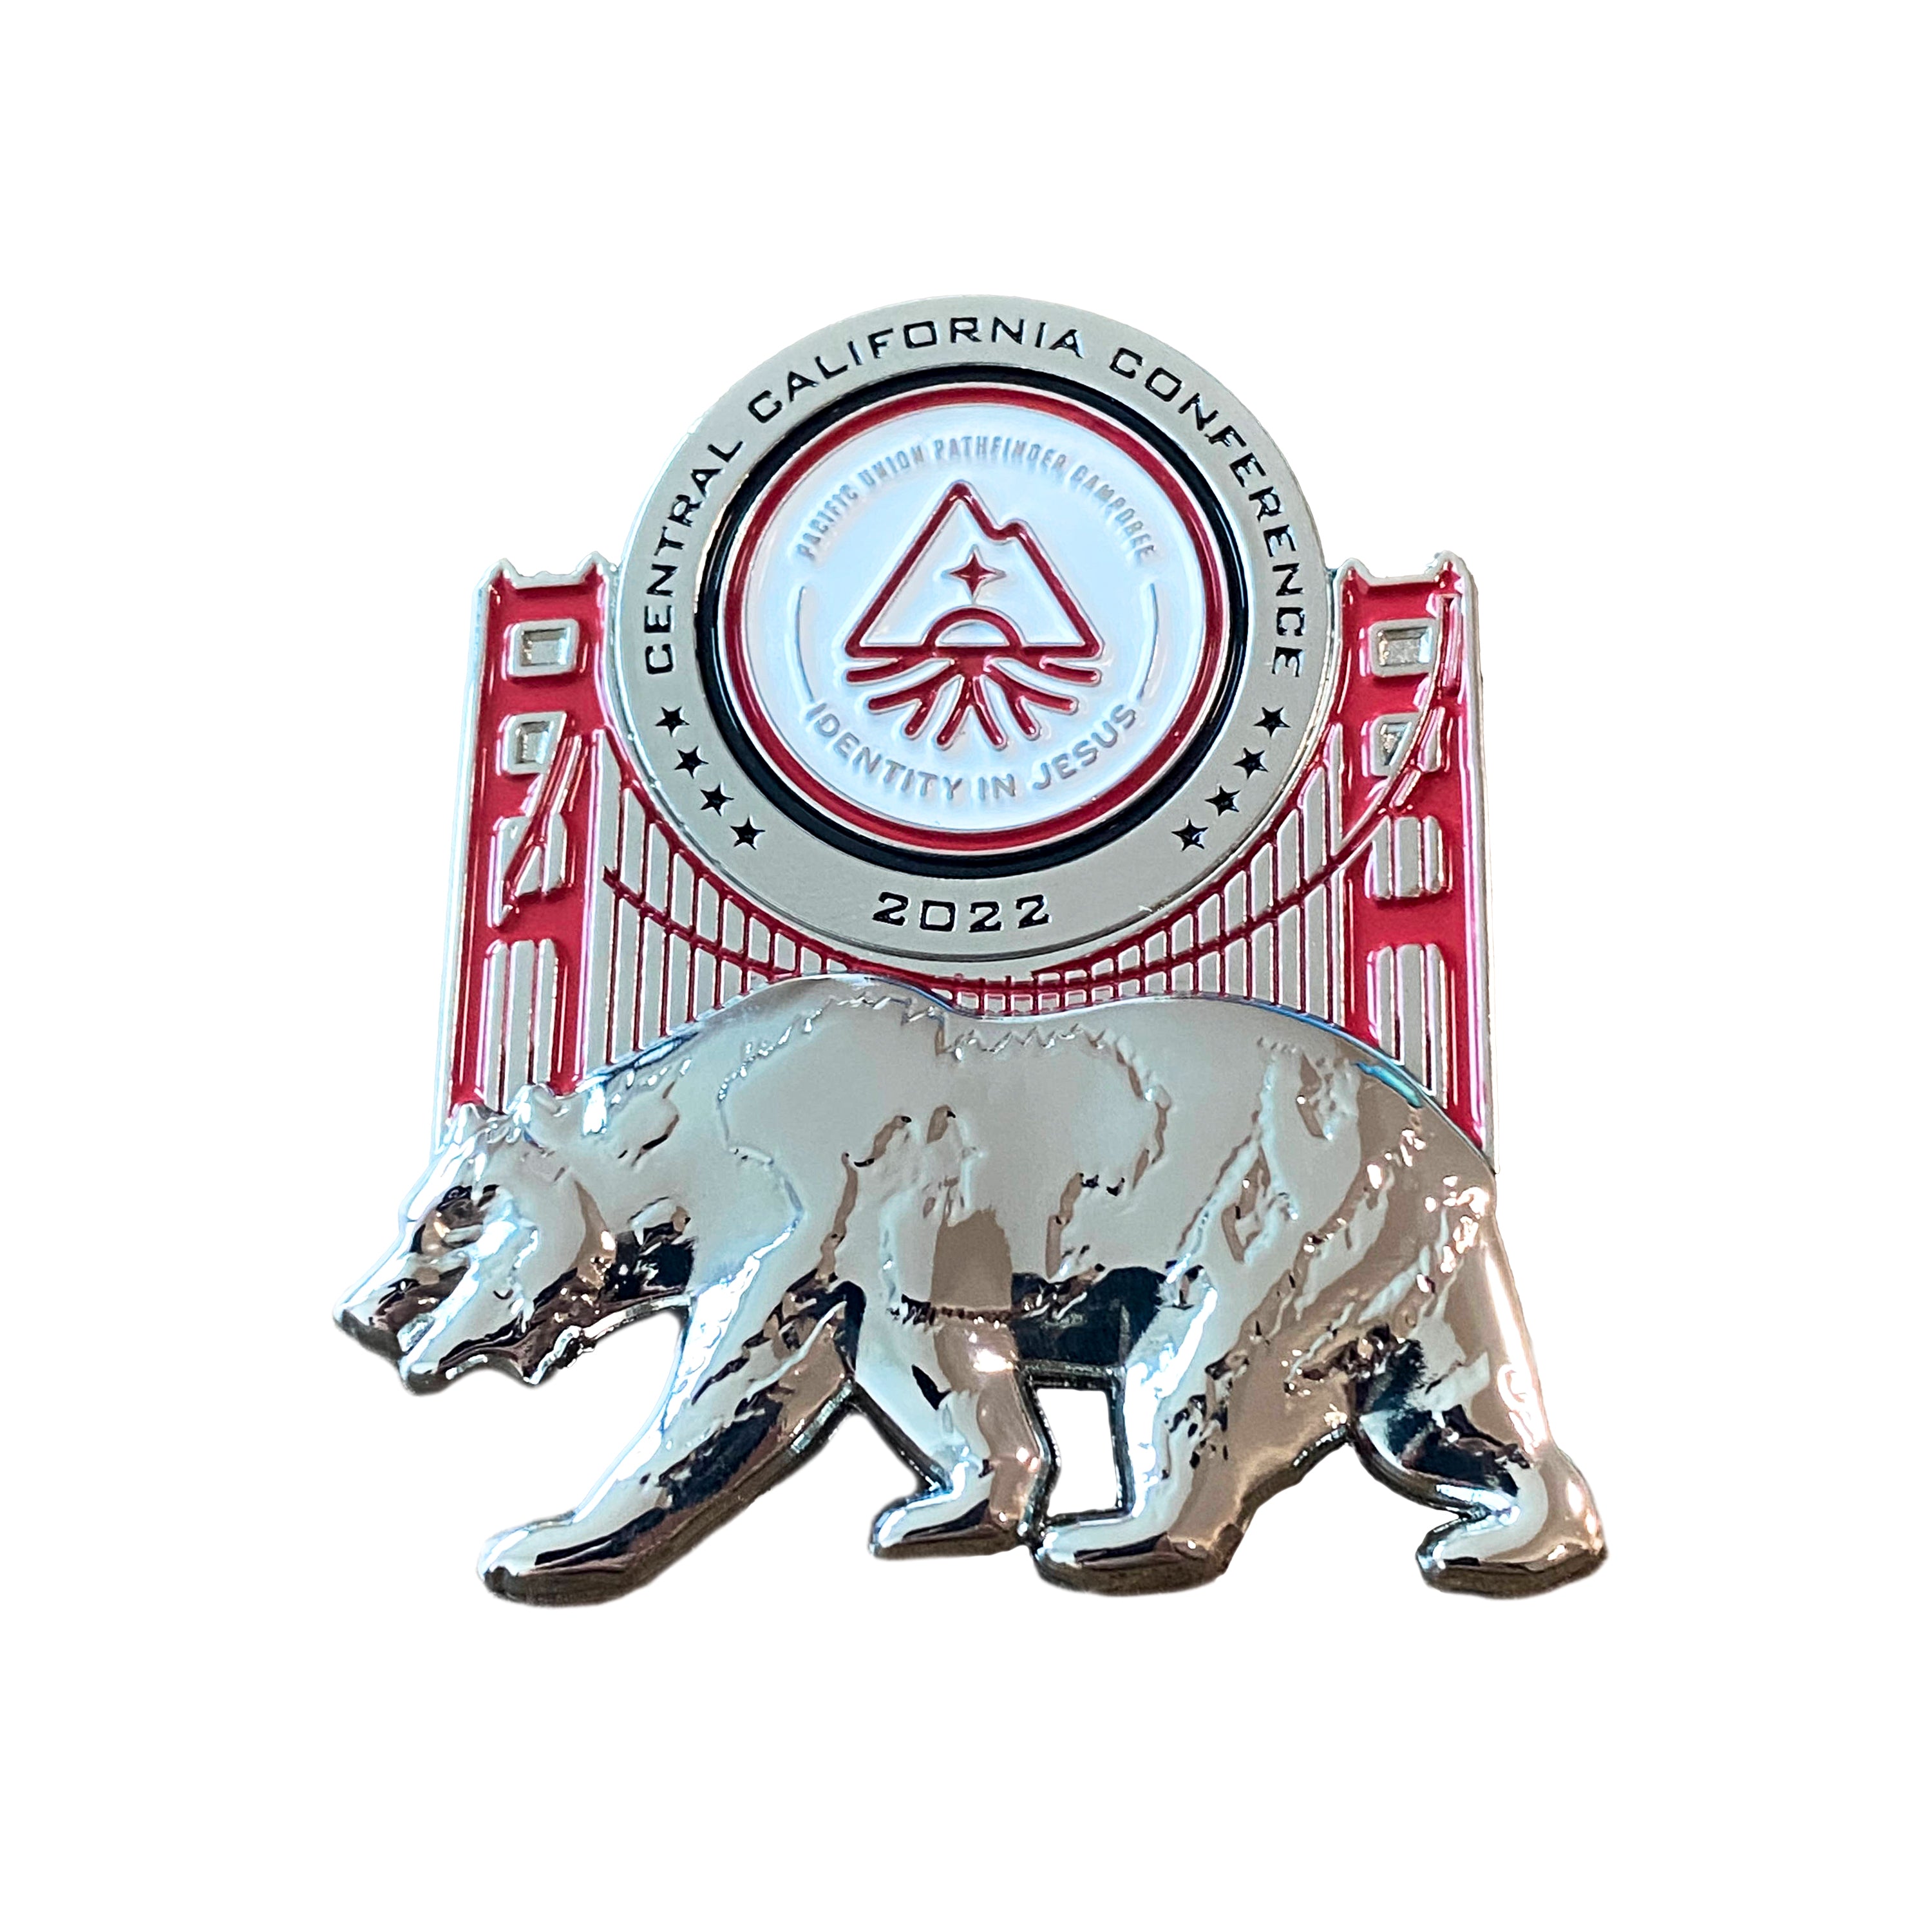 Central California Conference Pacific Union Pathfinder Camporee Pin